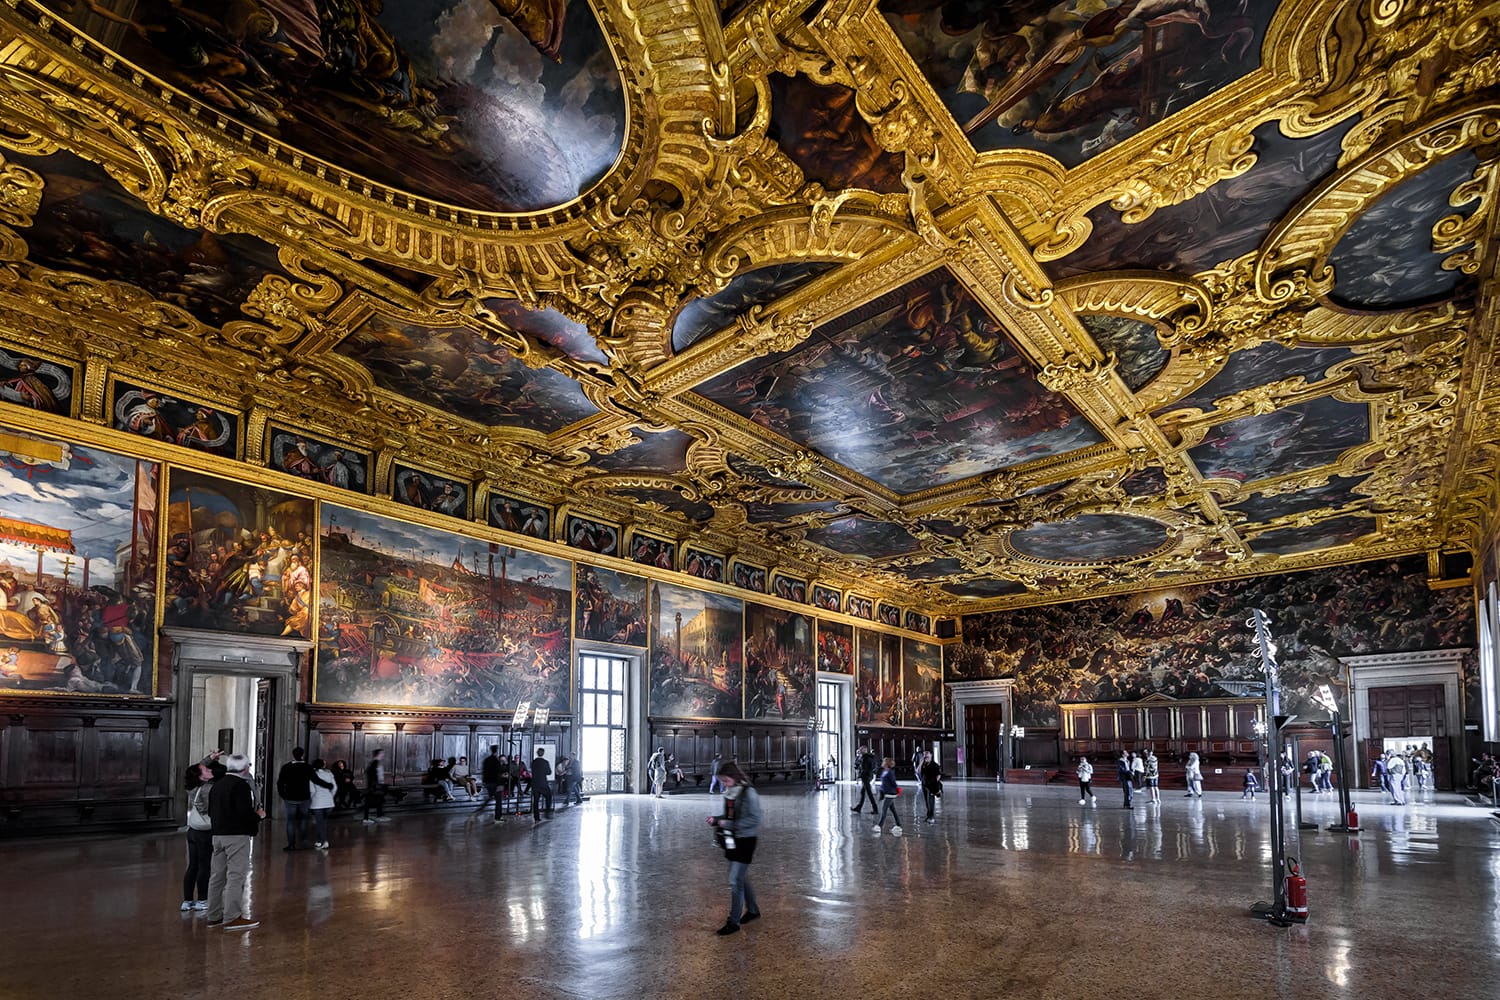 Interior of Palazzo Ducale or Doge's Palace, Higher Council Hall, Venice, Italy.